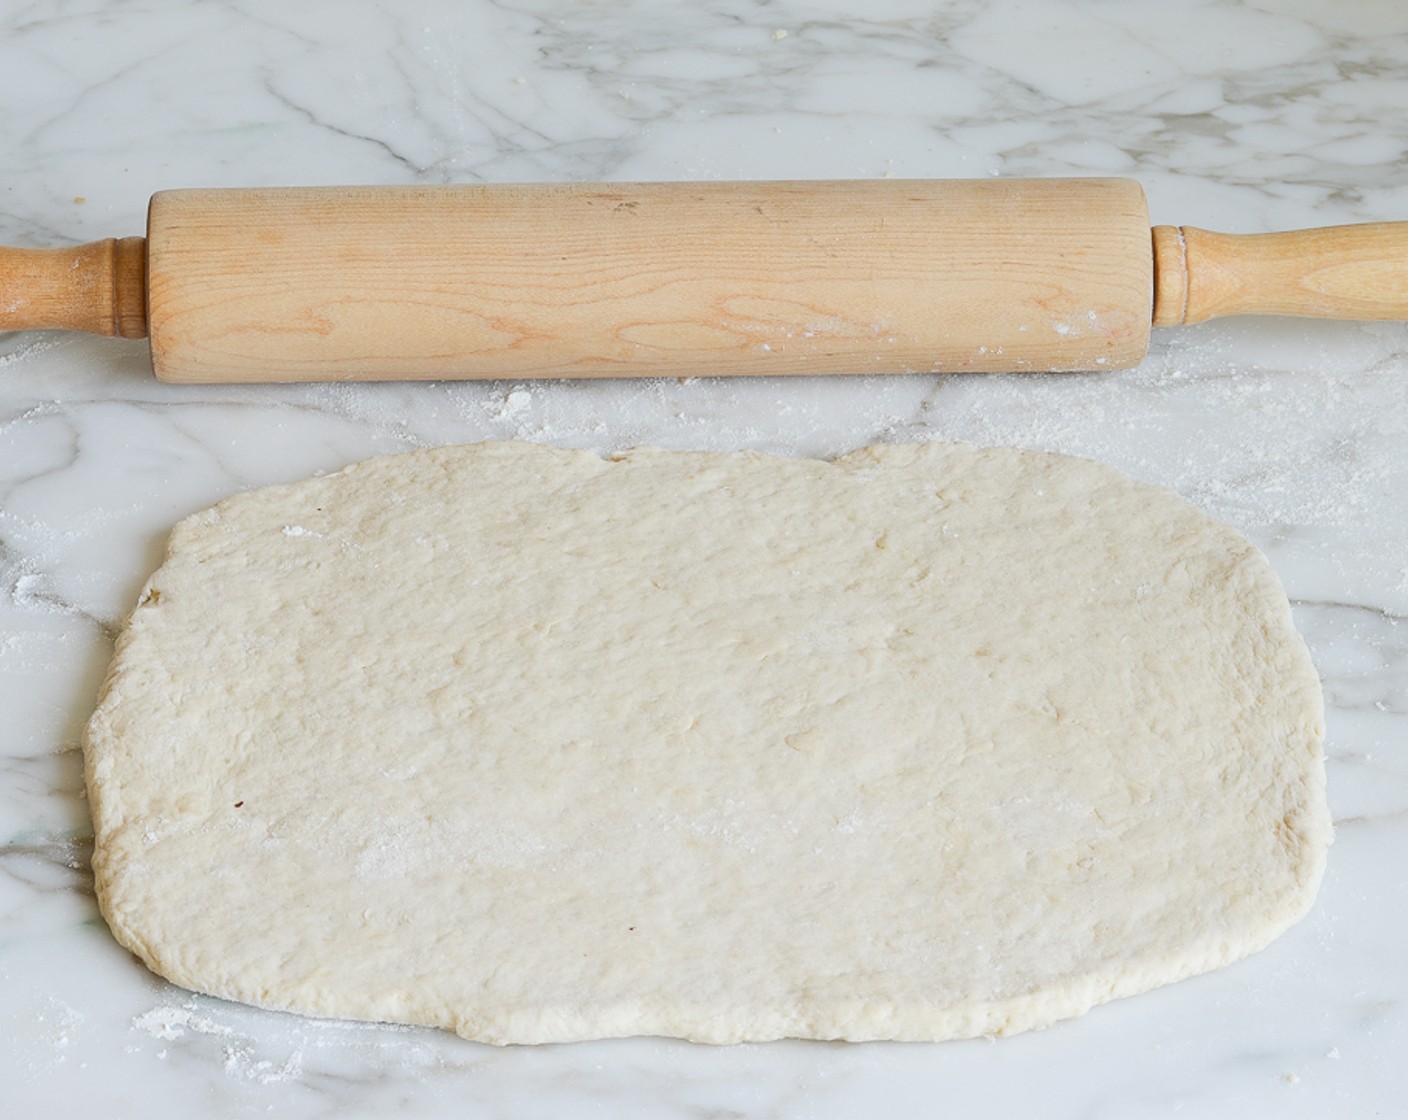 step 7 Lightly dust the surface again. Pat the dough into a small rectangle, then roll into a 12-inch x 9-inch rectangle, dusting more flour sparingly if necessary so the dough doesn't stick to the rolling pin.